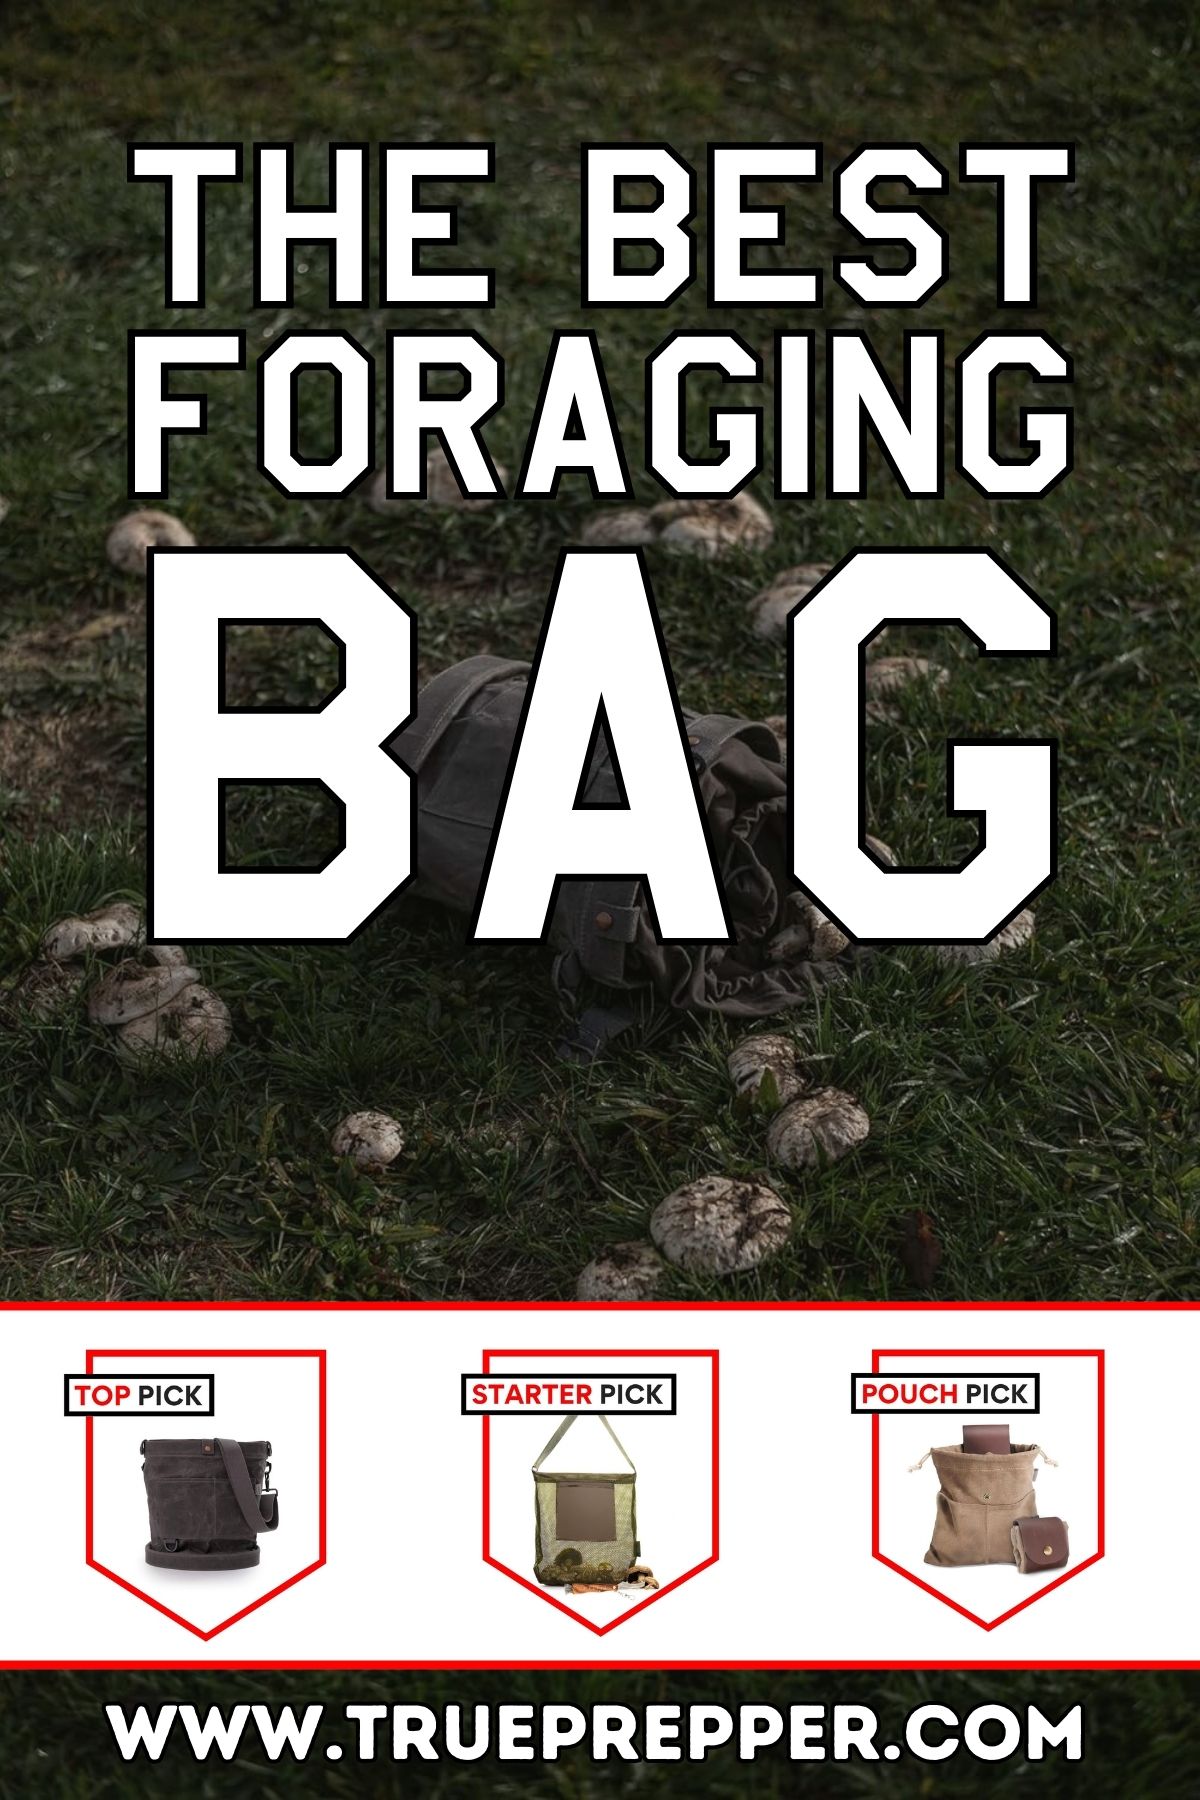 The Best Foraging Bag